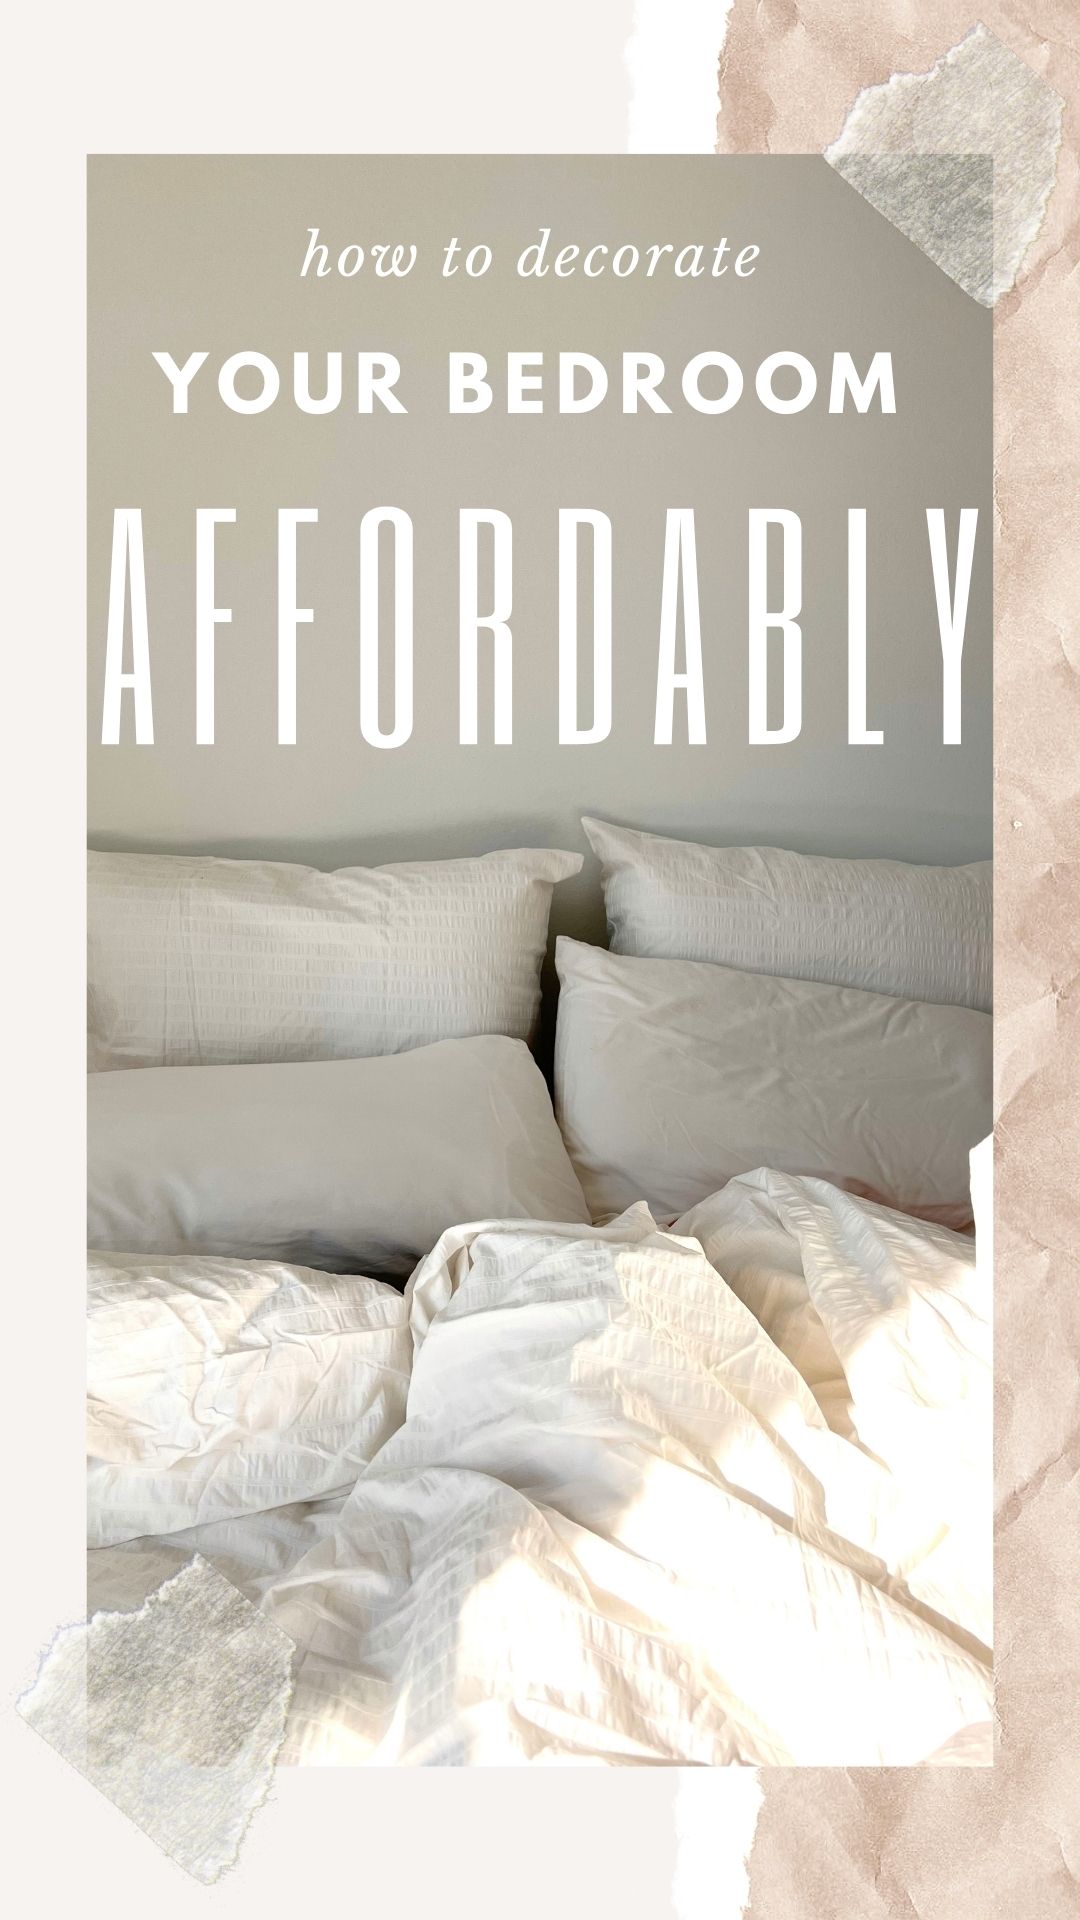 How to decorate your bed affordably